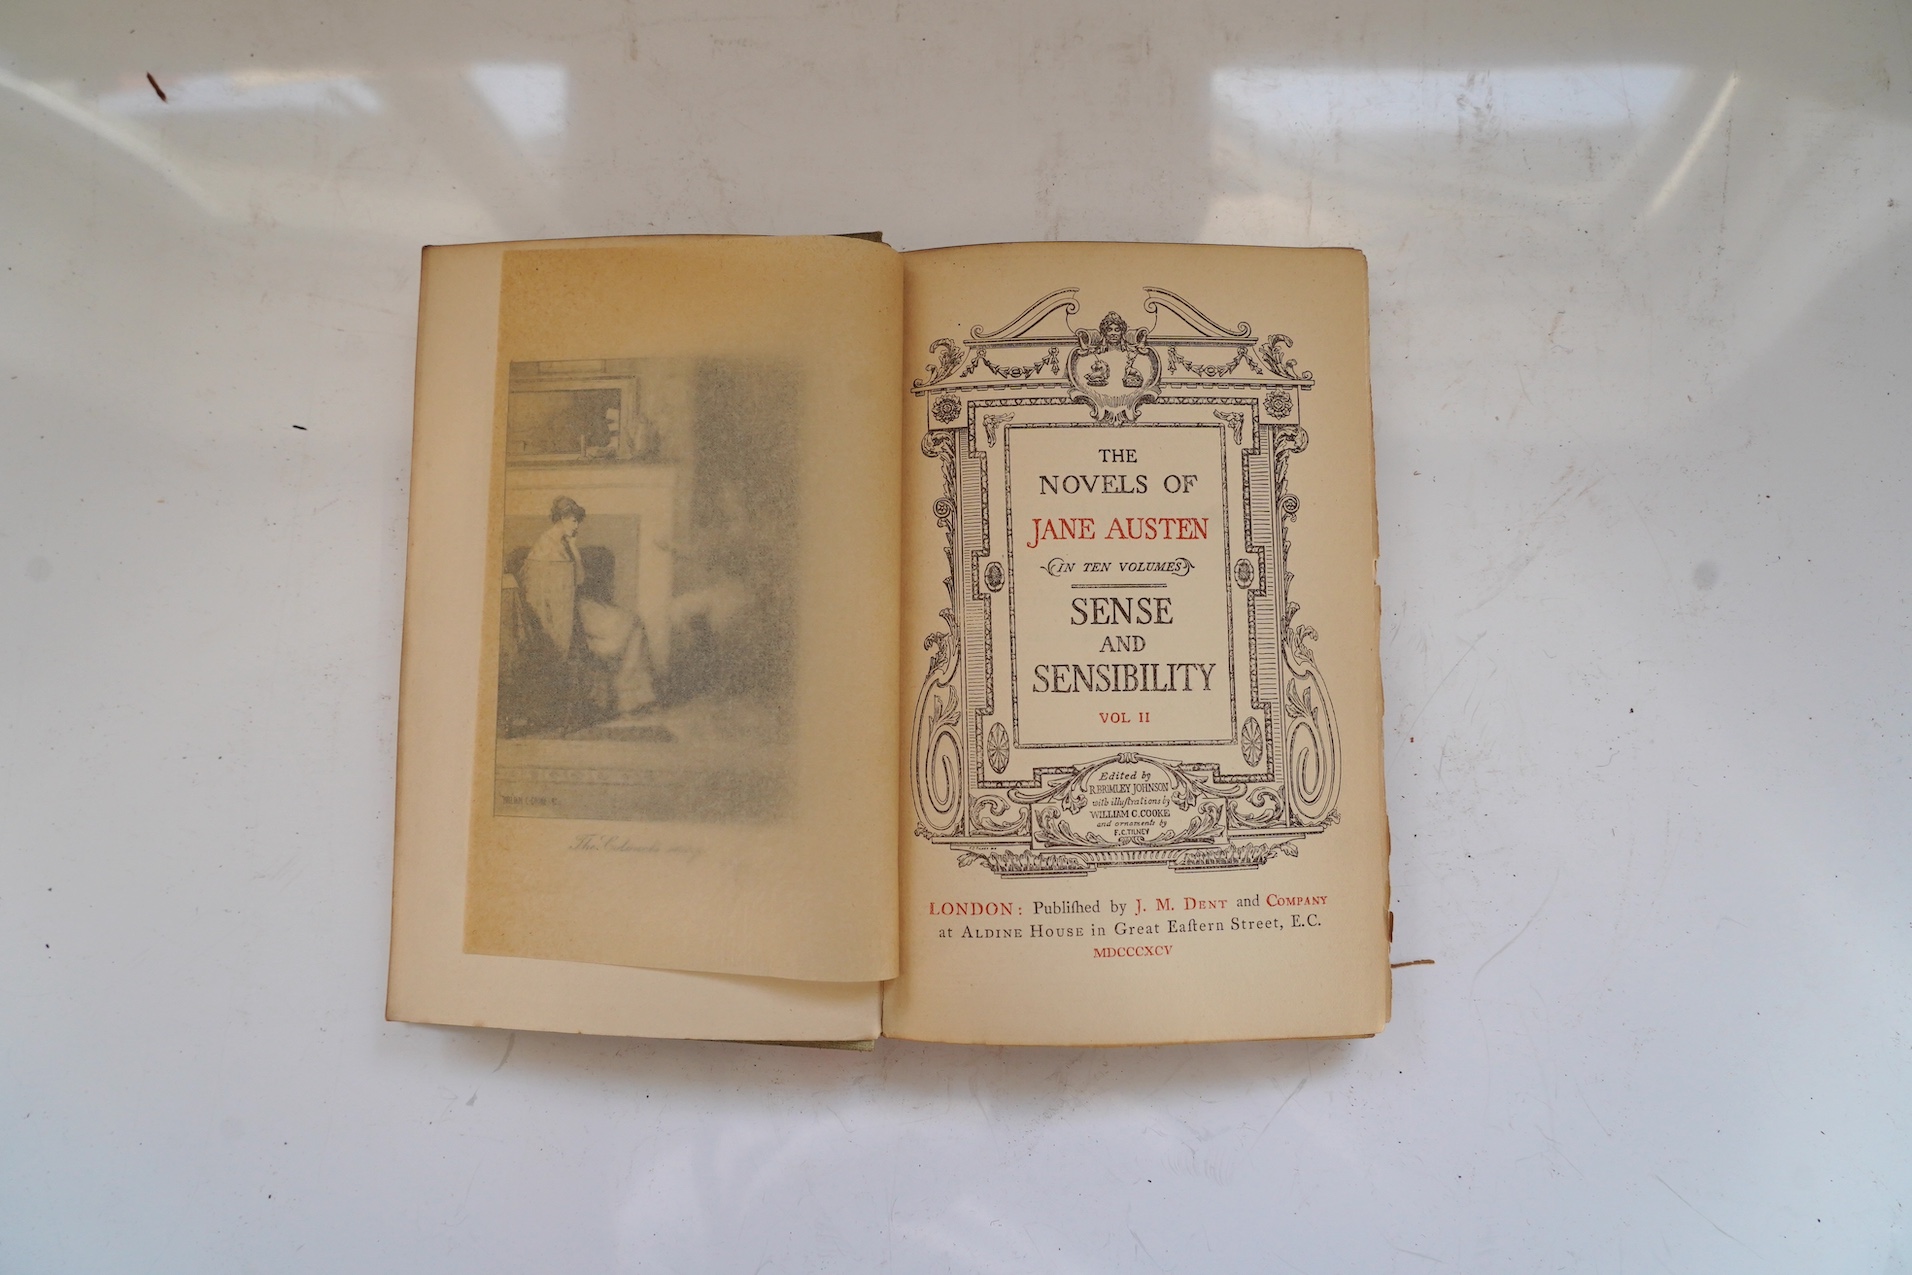 Austen, Jane - Jane Austen's Novels. Edited by Reginald Brimley Johnson, 10 vols. with a frontis and 30 other plates (by William C. Cooke), decorated titles; publisher's gilt cloth and gilt tops, sm. cr. 8vo. J.M. Dent,